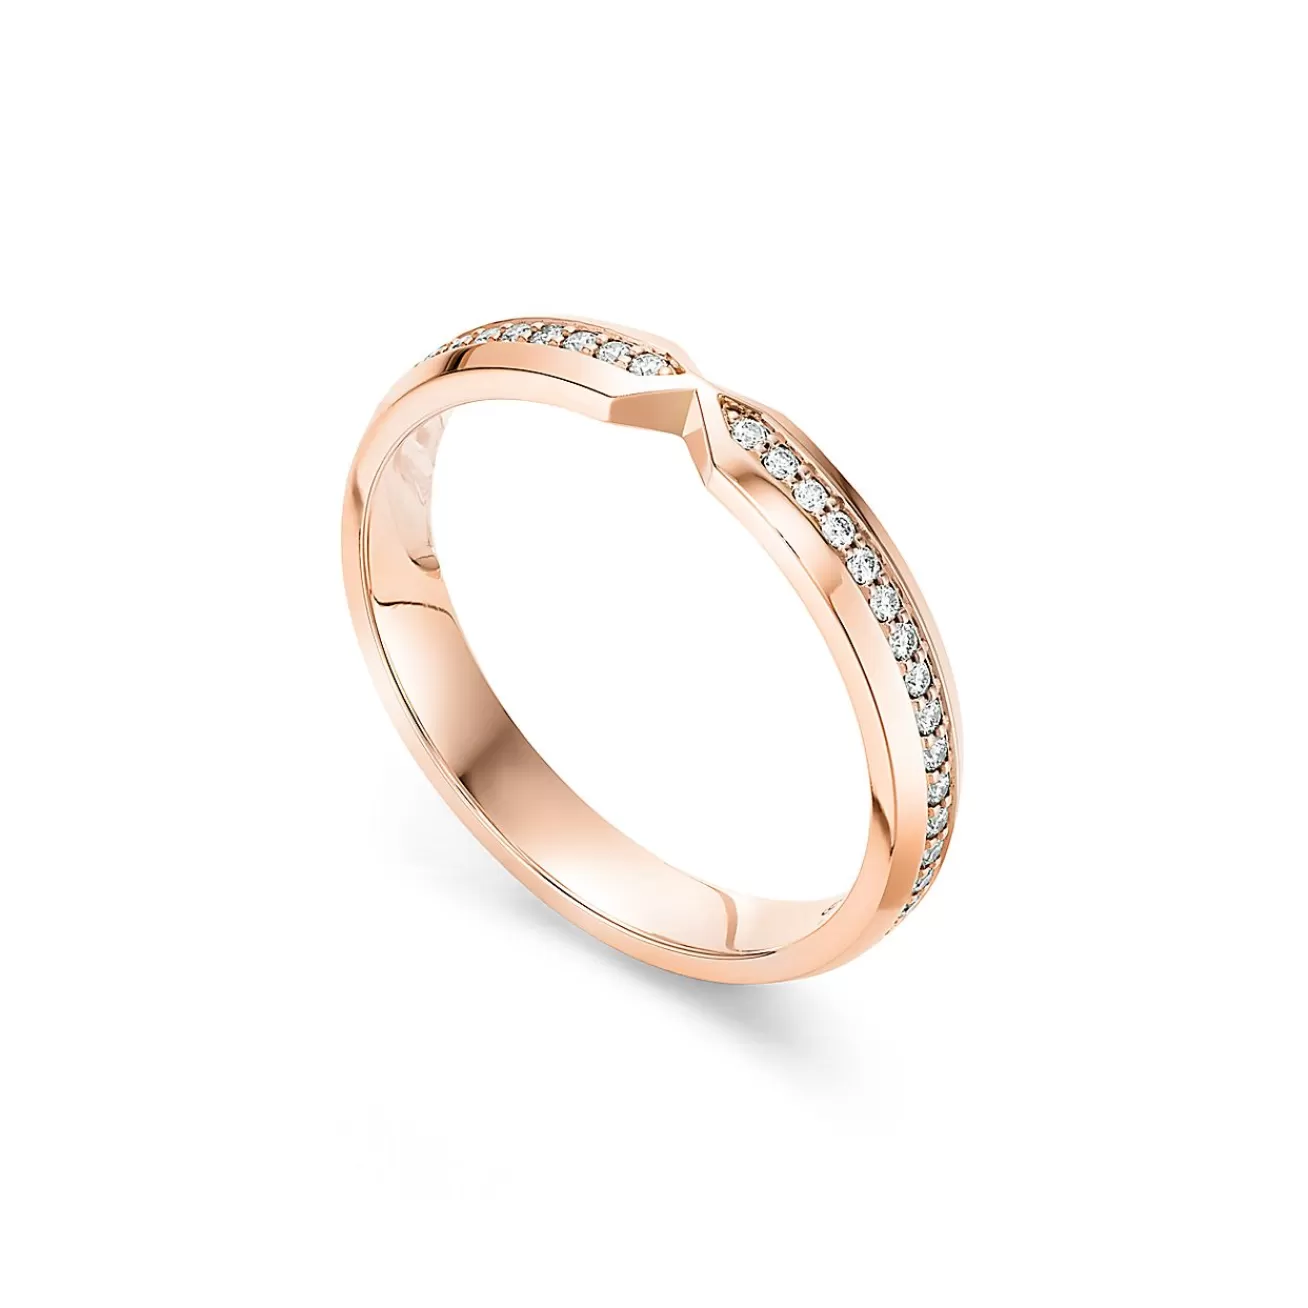 Tiffany & Co. The Tiffany® Setting nesting narrow band ring in 18k rose gold with diamonds. | ^Women Rings | Stacking Rings